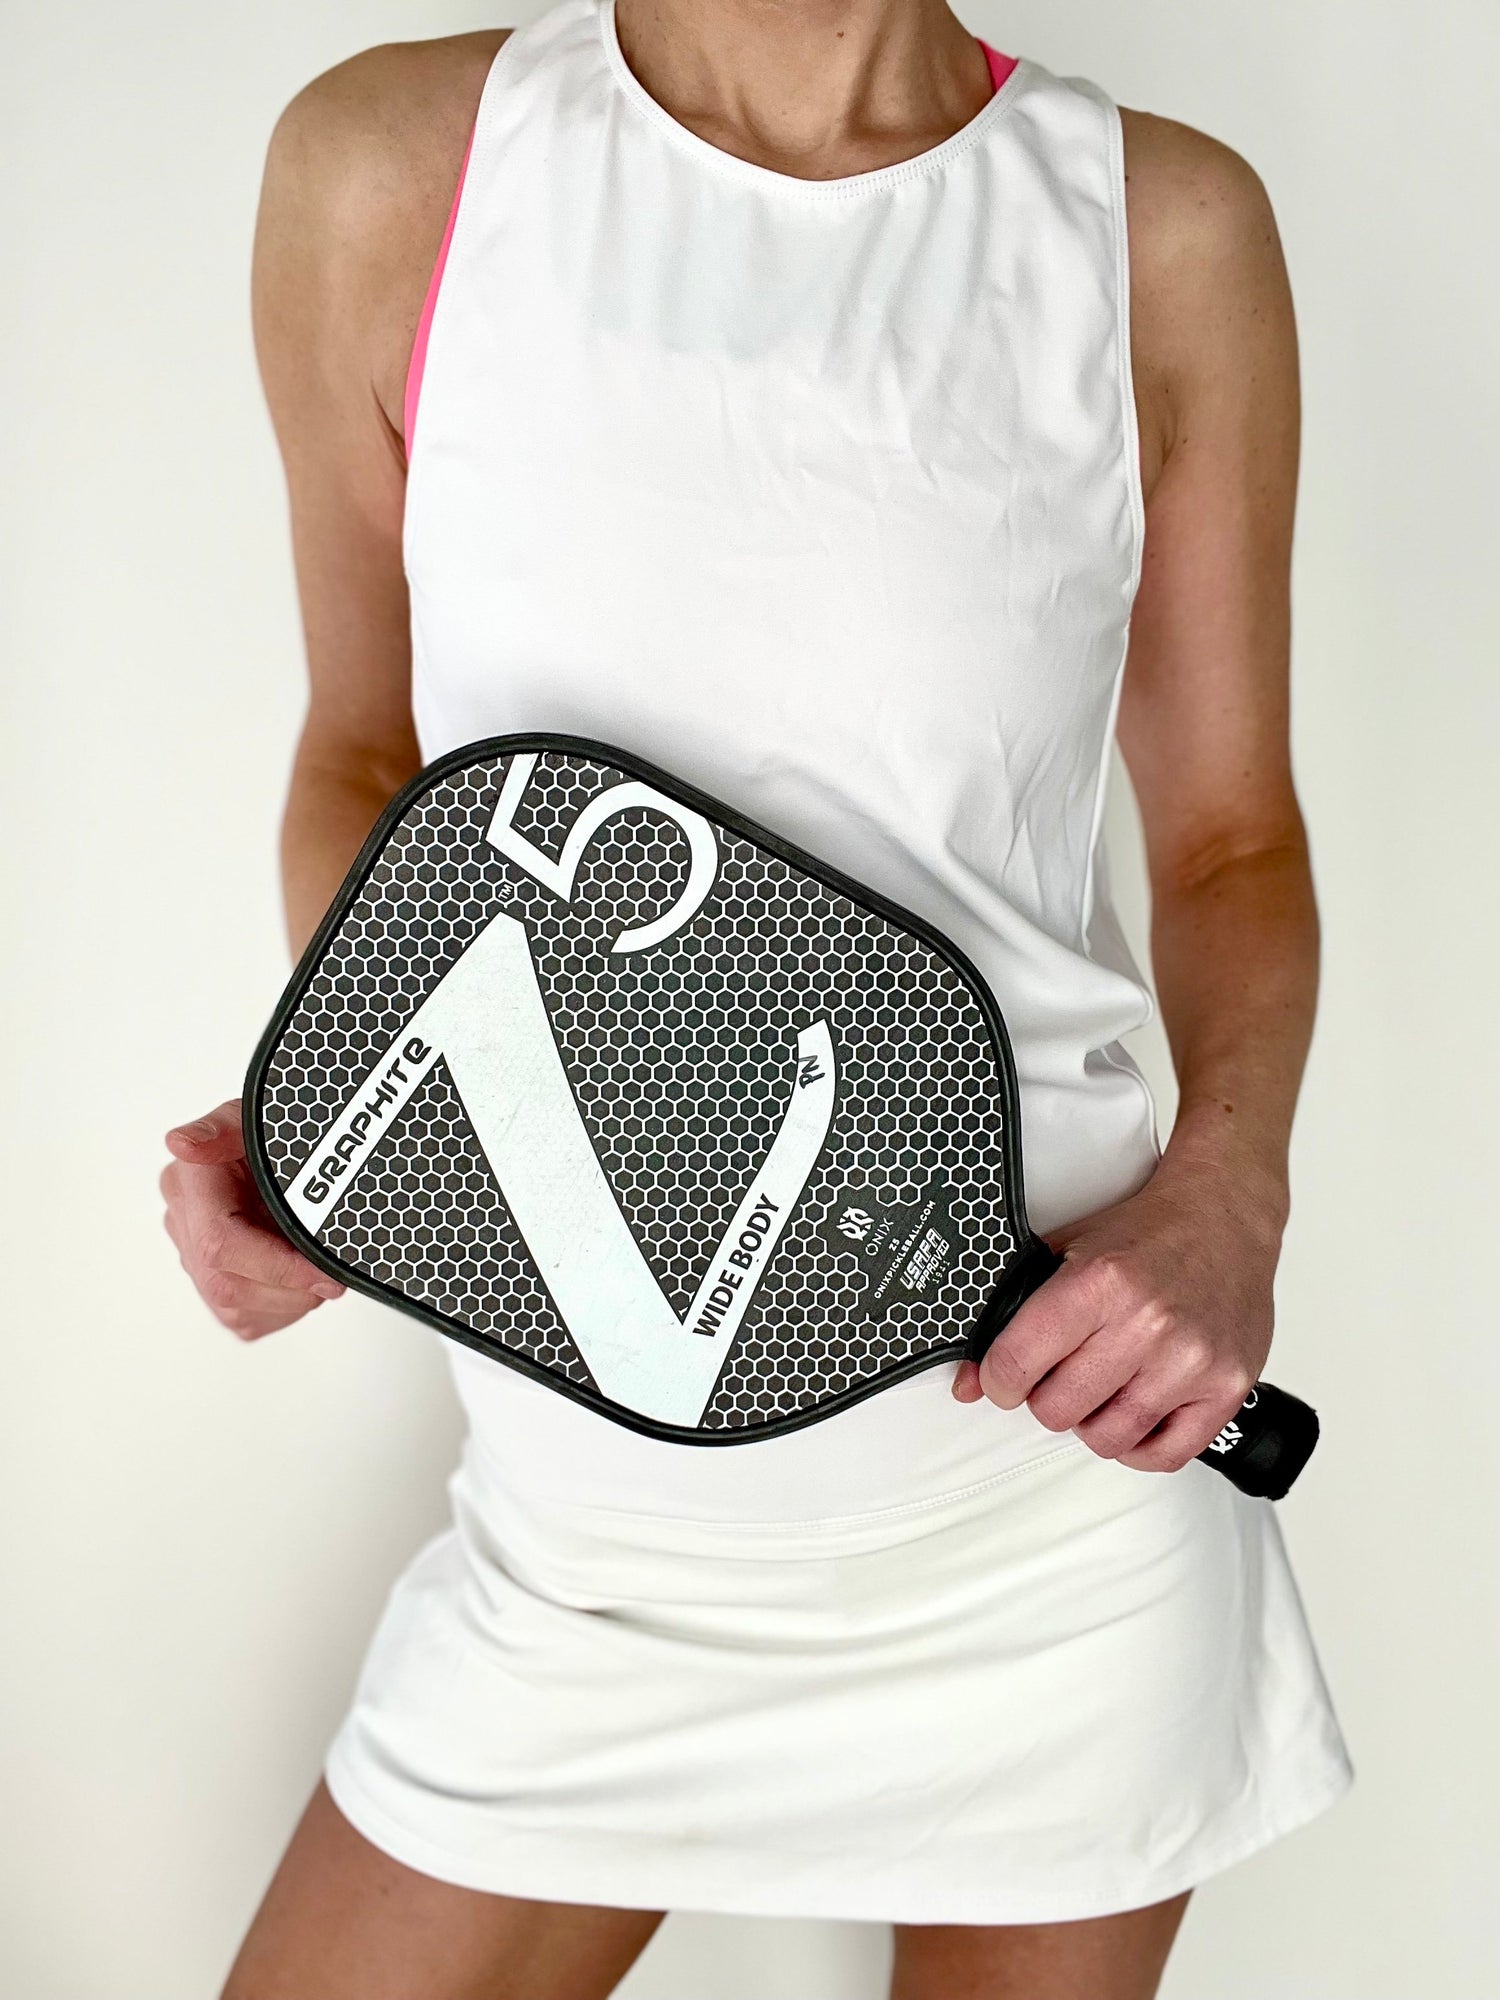 The Anatomy of a Pickleball Paddle and a Pickleball Dress